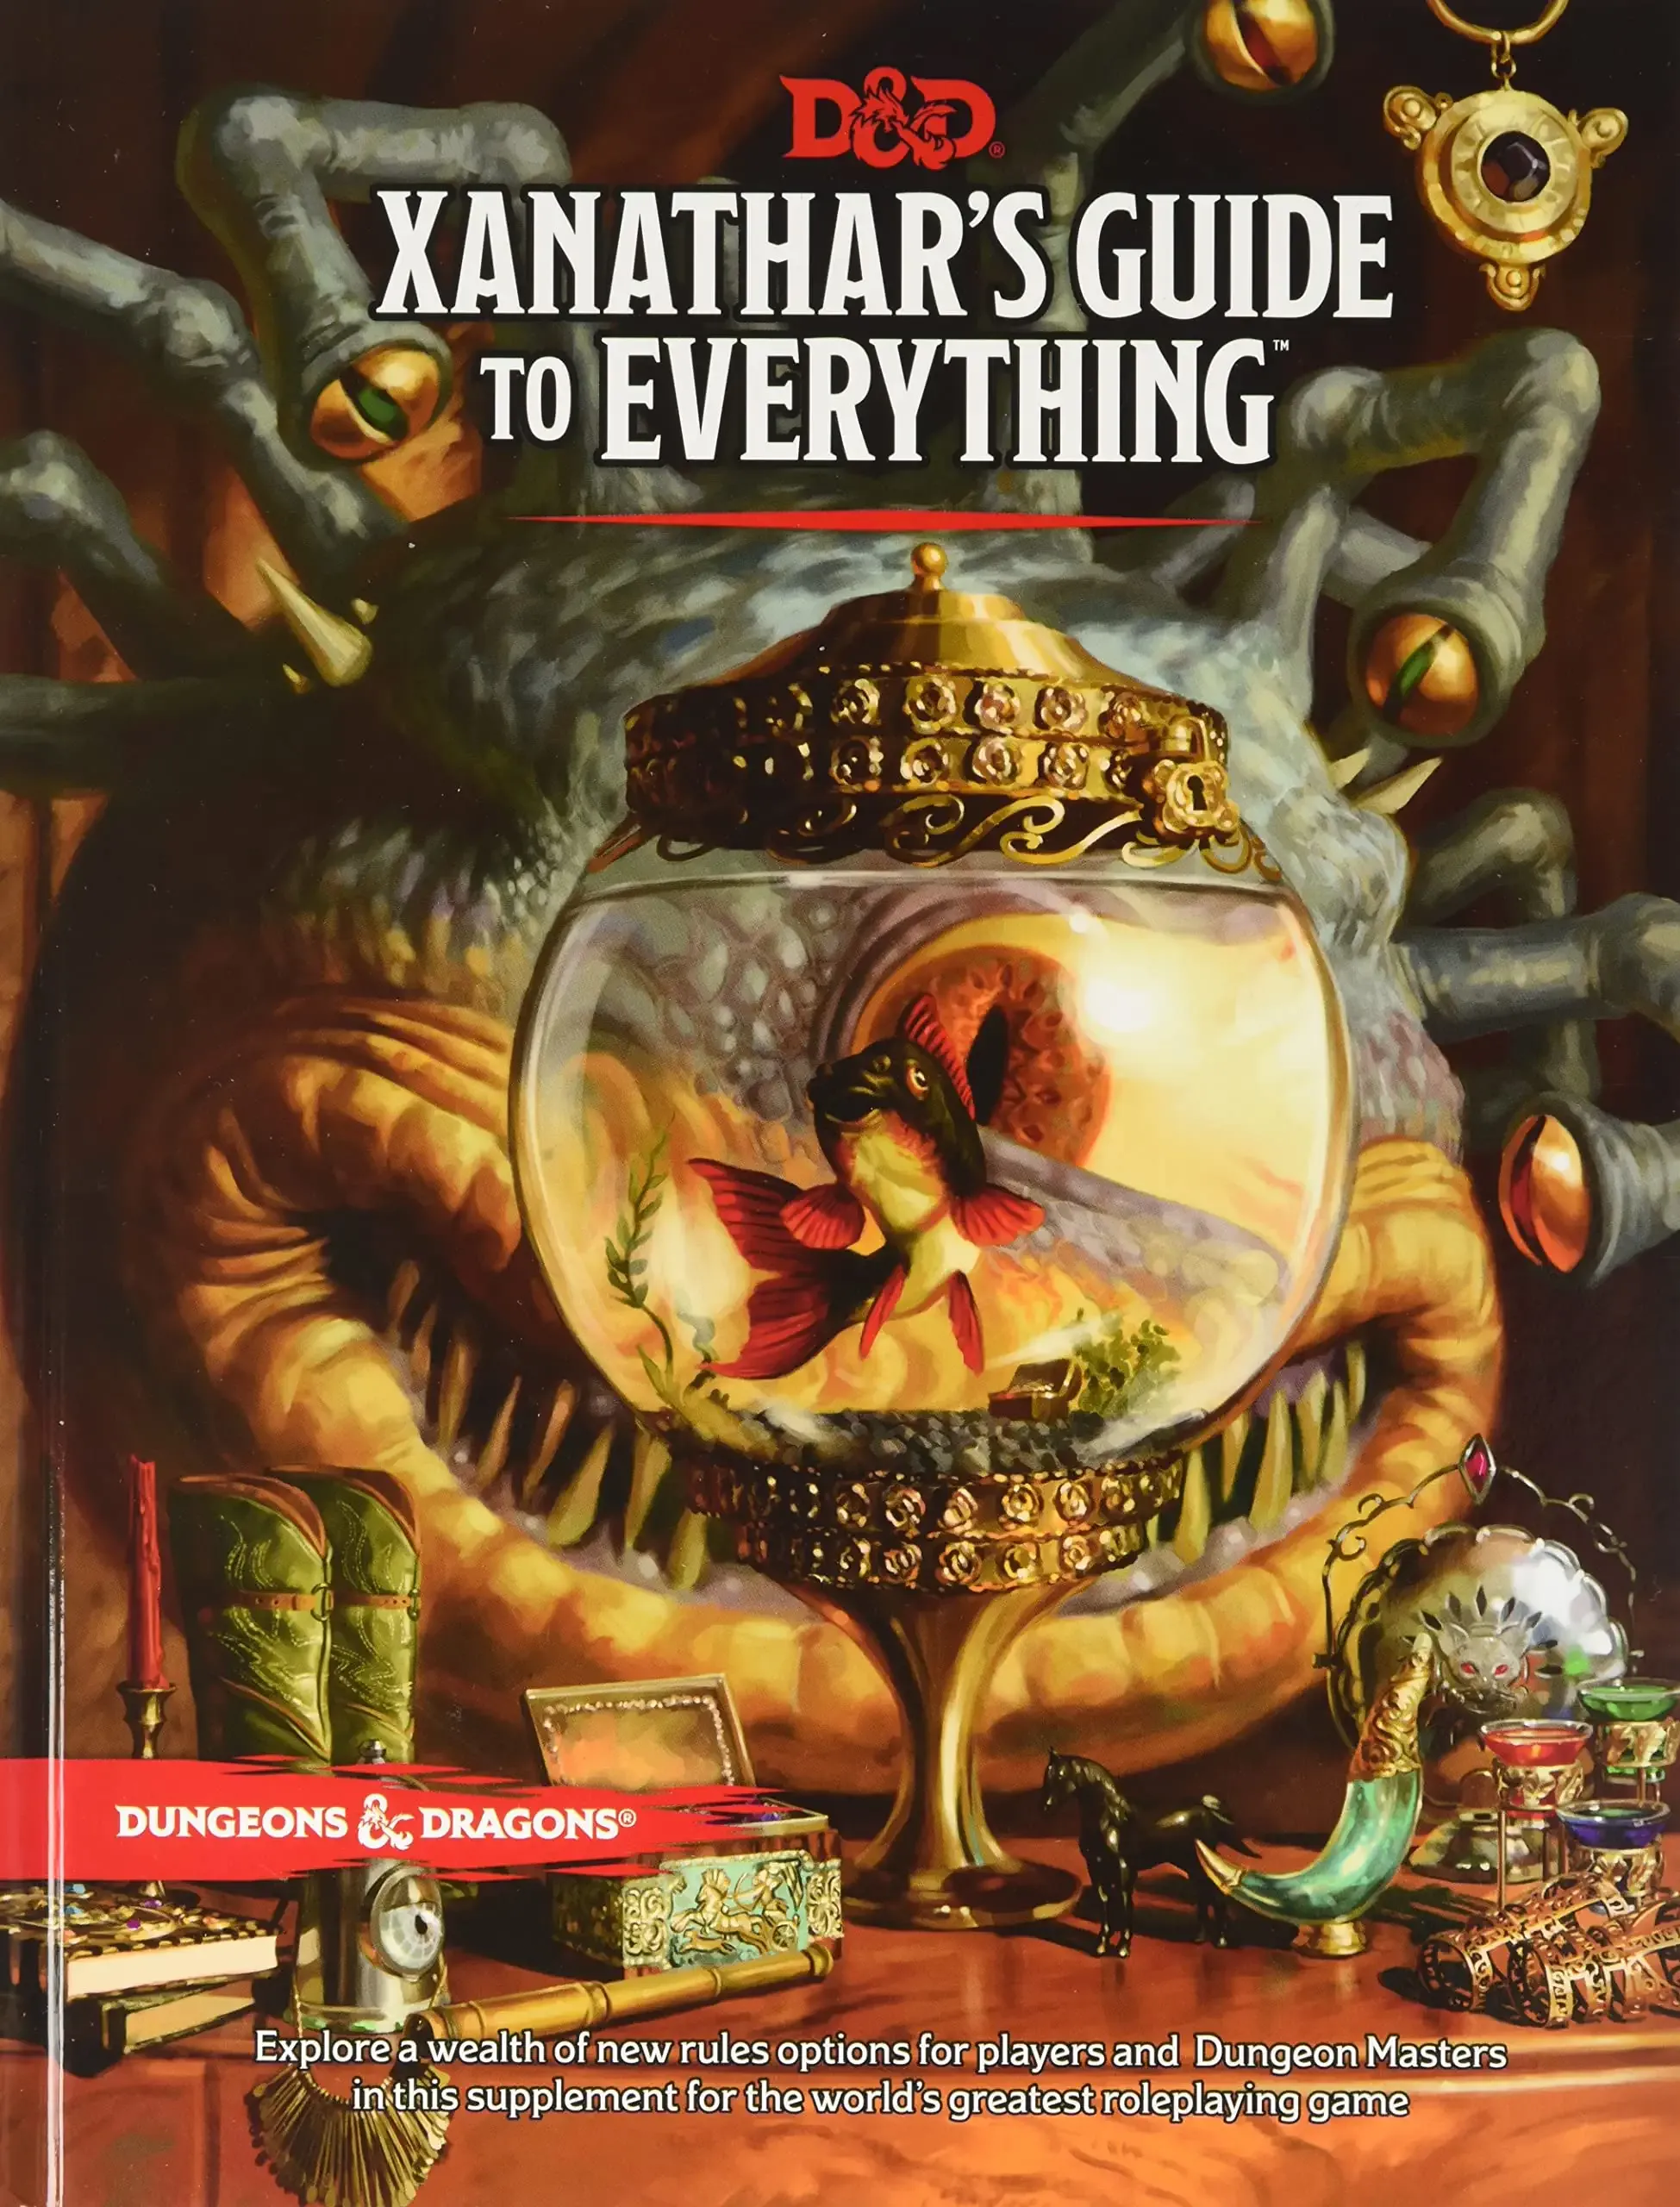 xanathars-guide-to-everything-best-dungeons-and-dragons-book